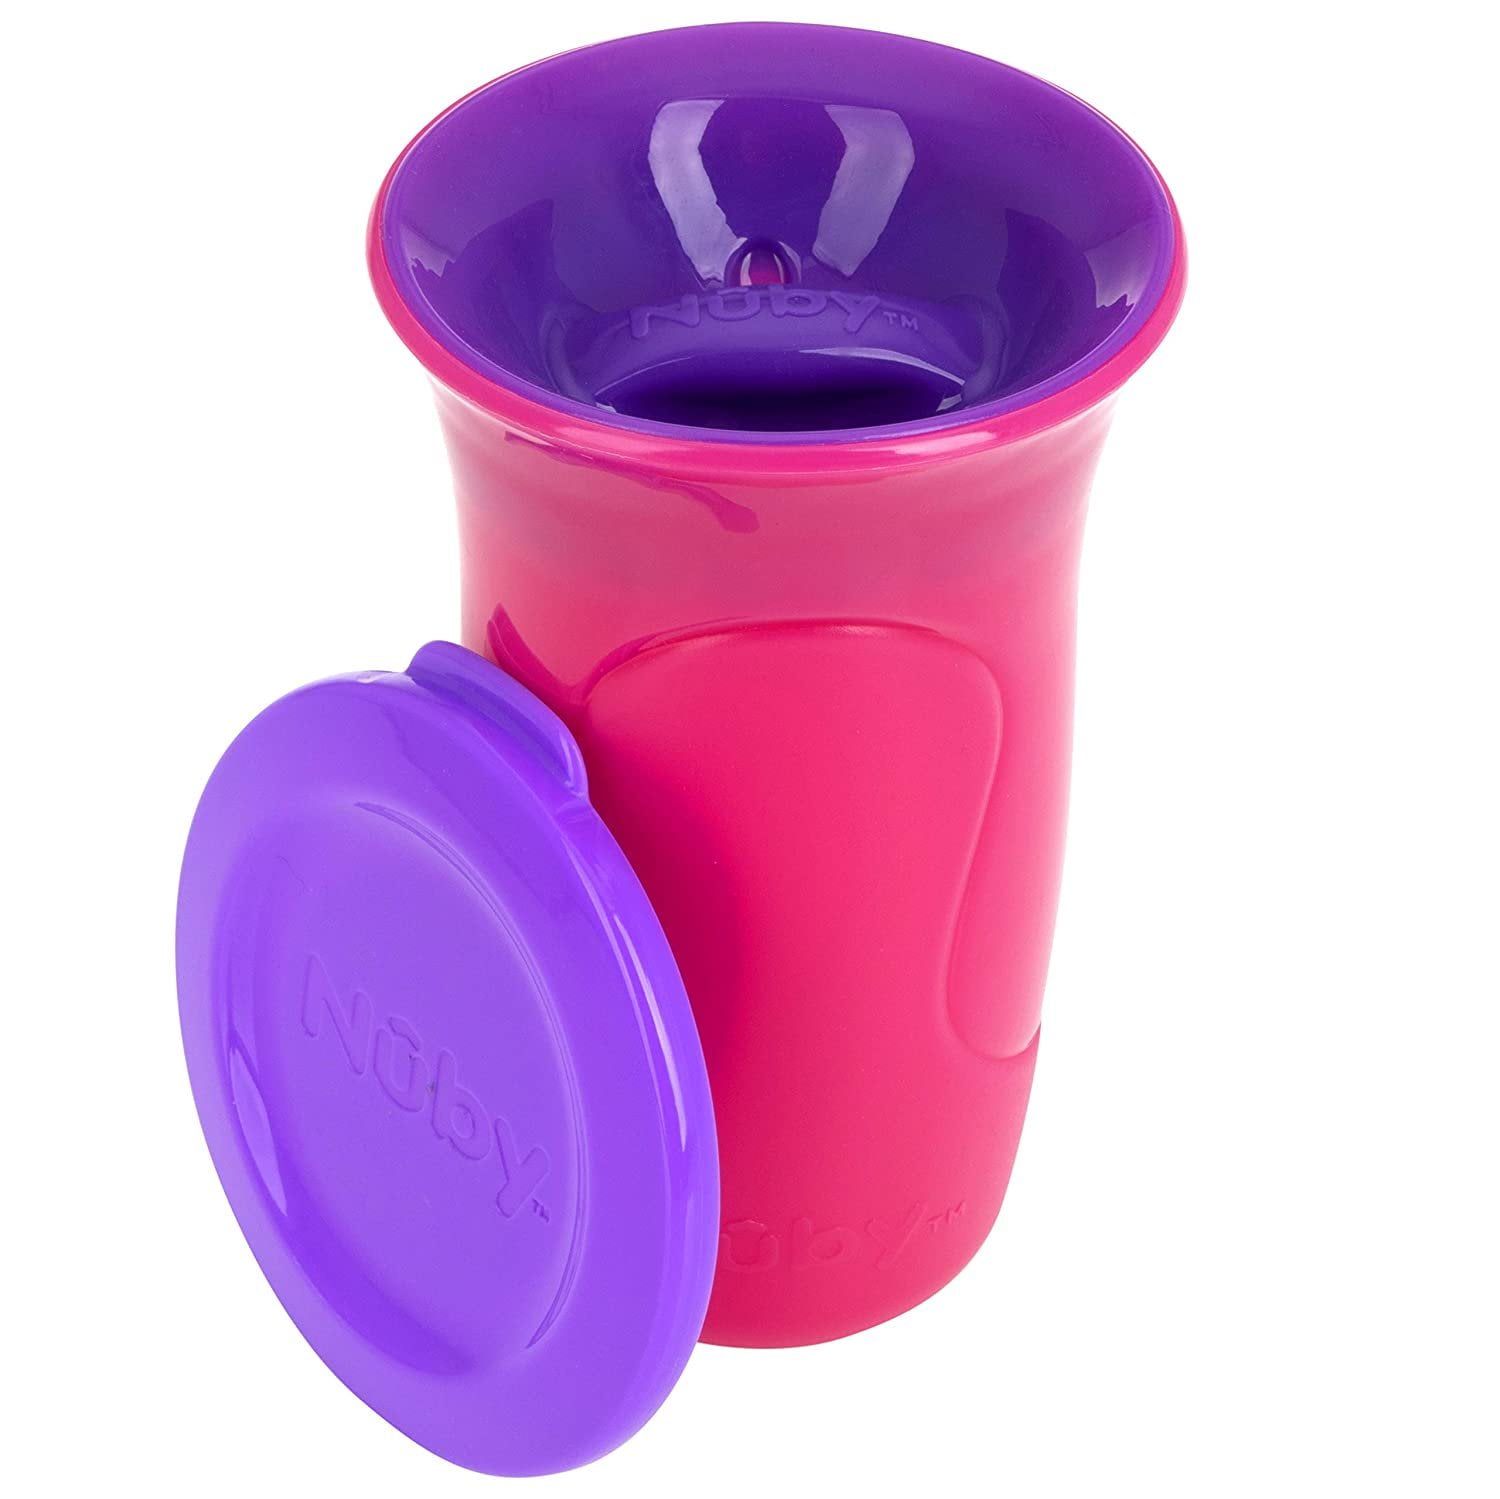 Nuby No Spill Edge 360 10 oz Cup with Silicone Rim, 2 Pack